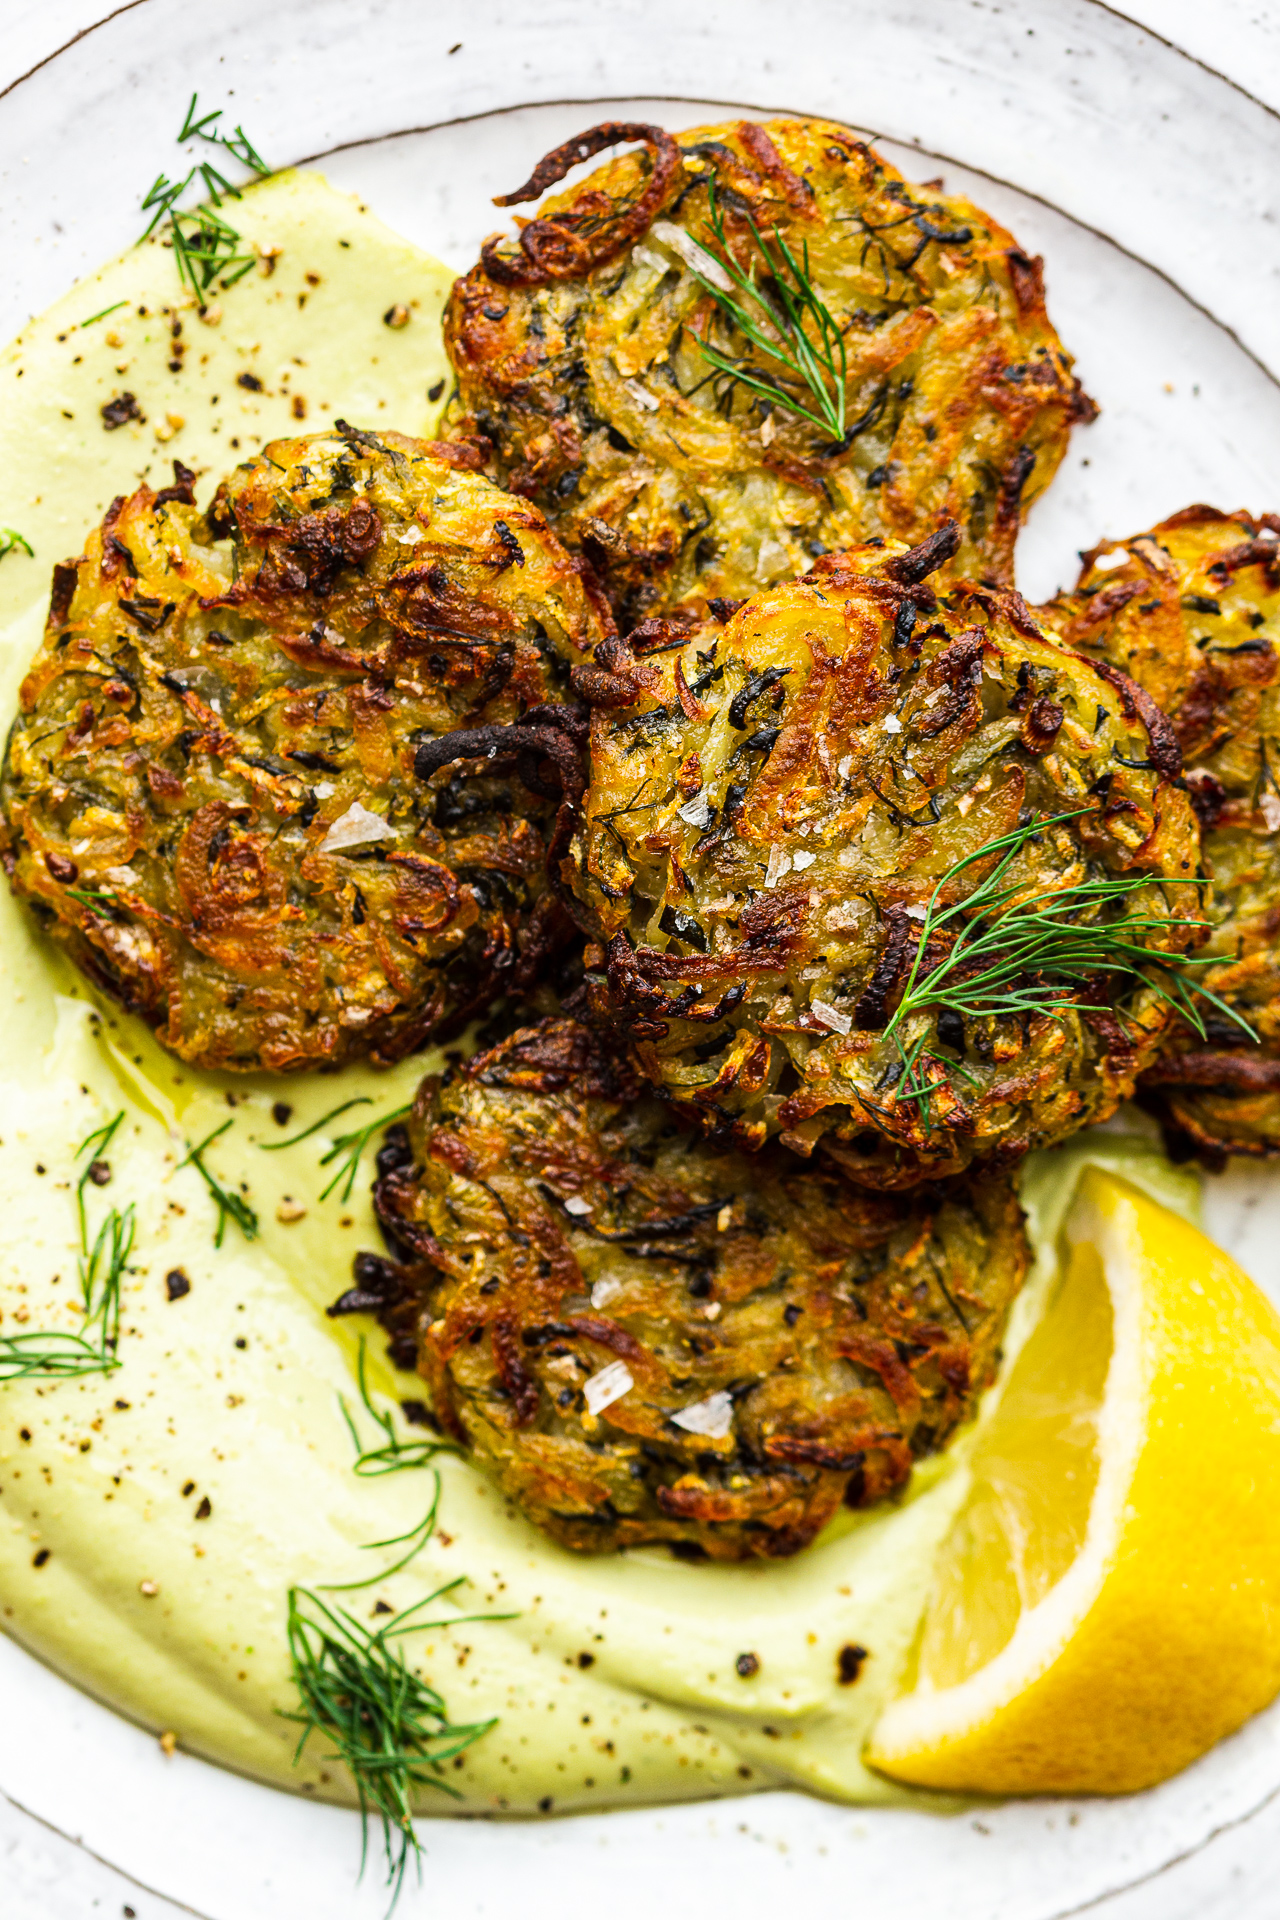 Baked zucchini fritters - Lazy Cat Kitchen